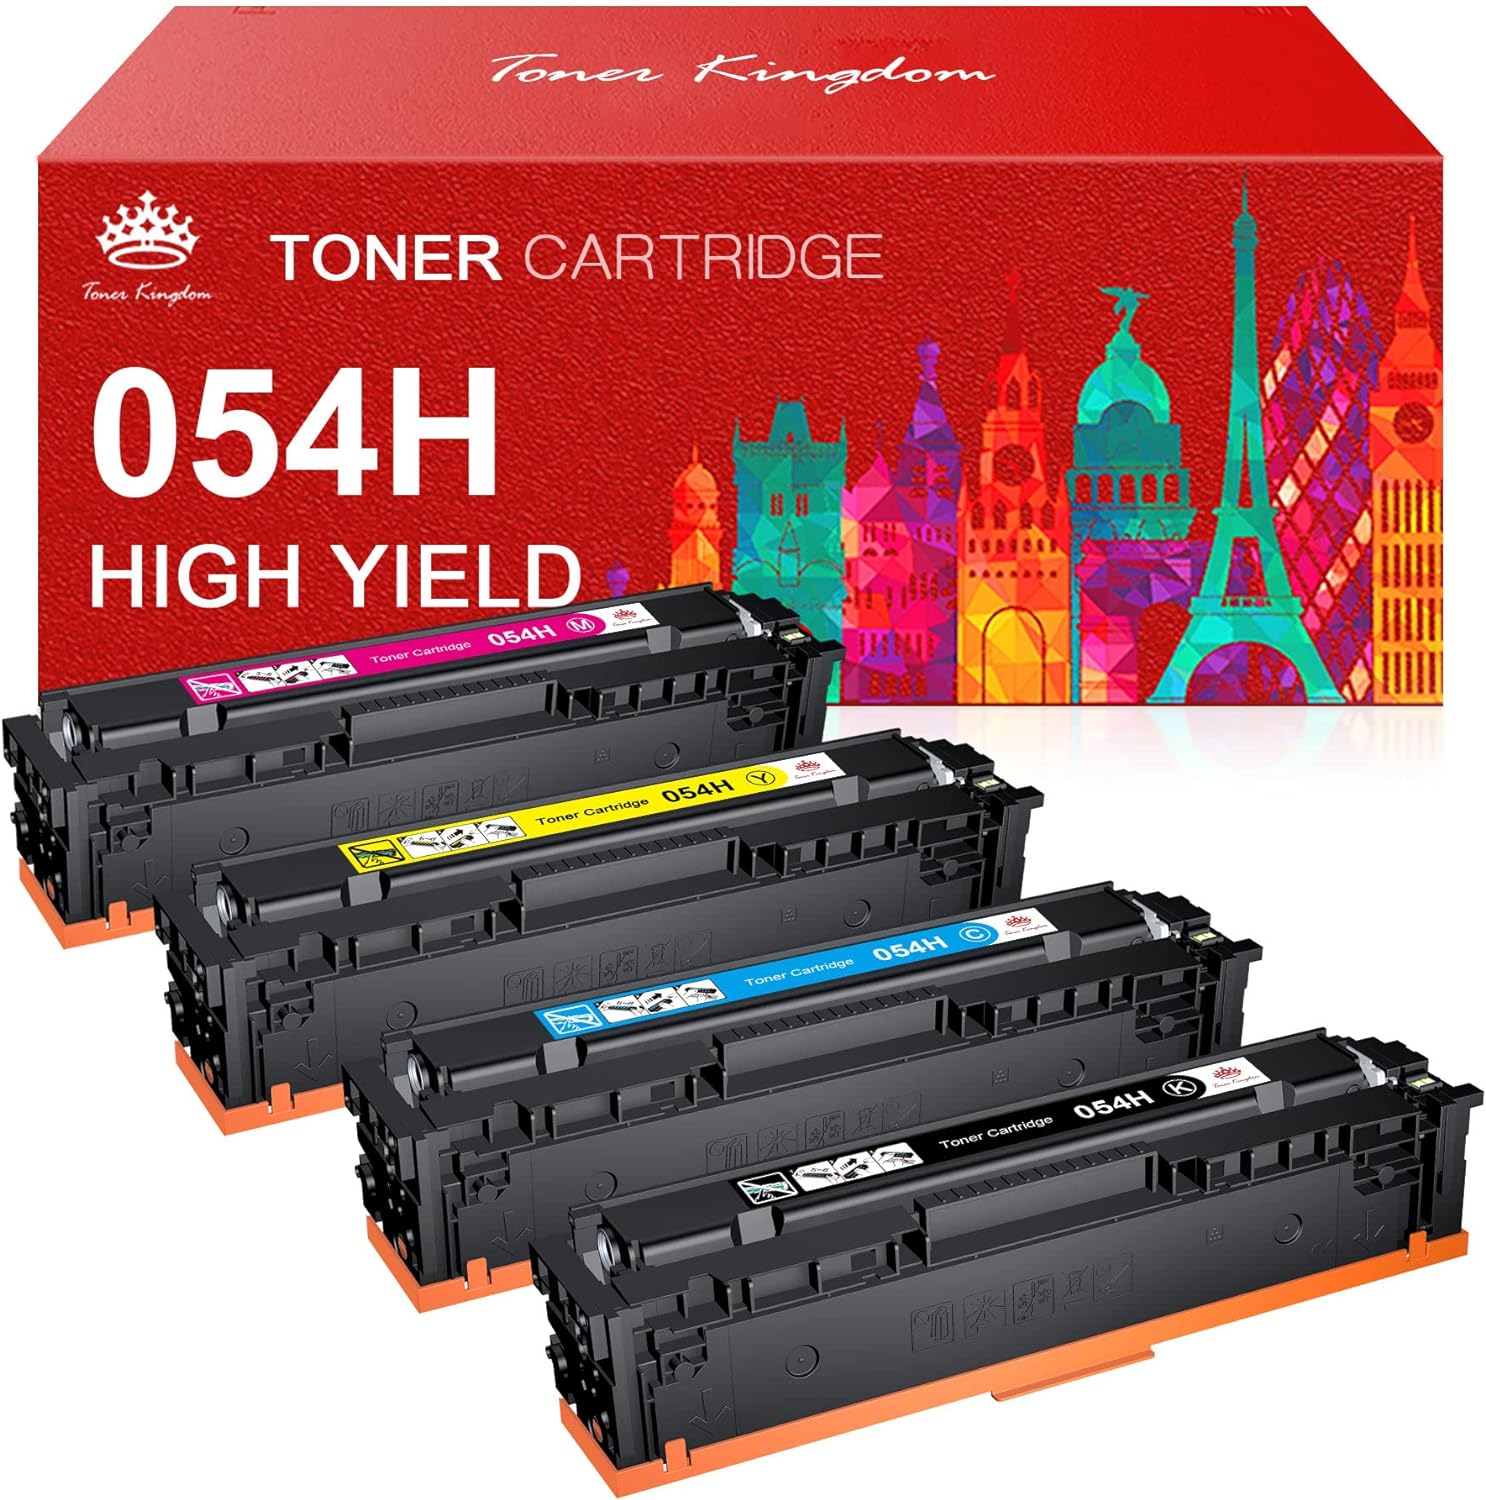 Canon 054 054H Compatible Toner Cartridge Replacement    (1 Black 1 Cyan 1 Magenta 1 Yellow) -4 Pack